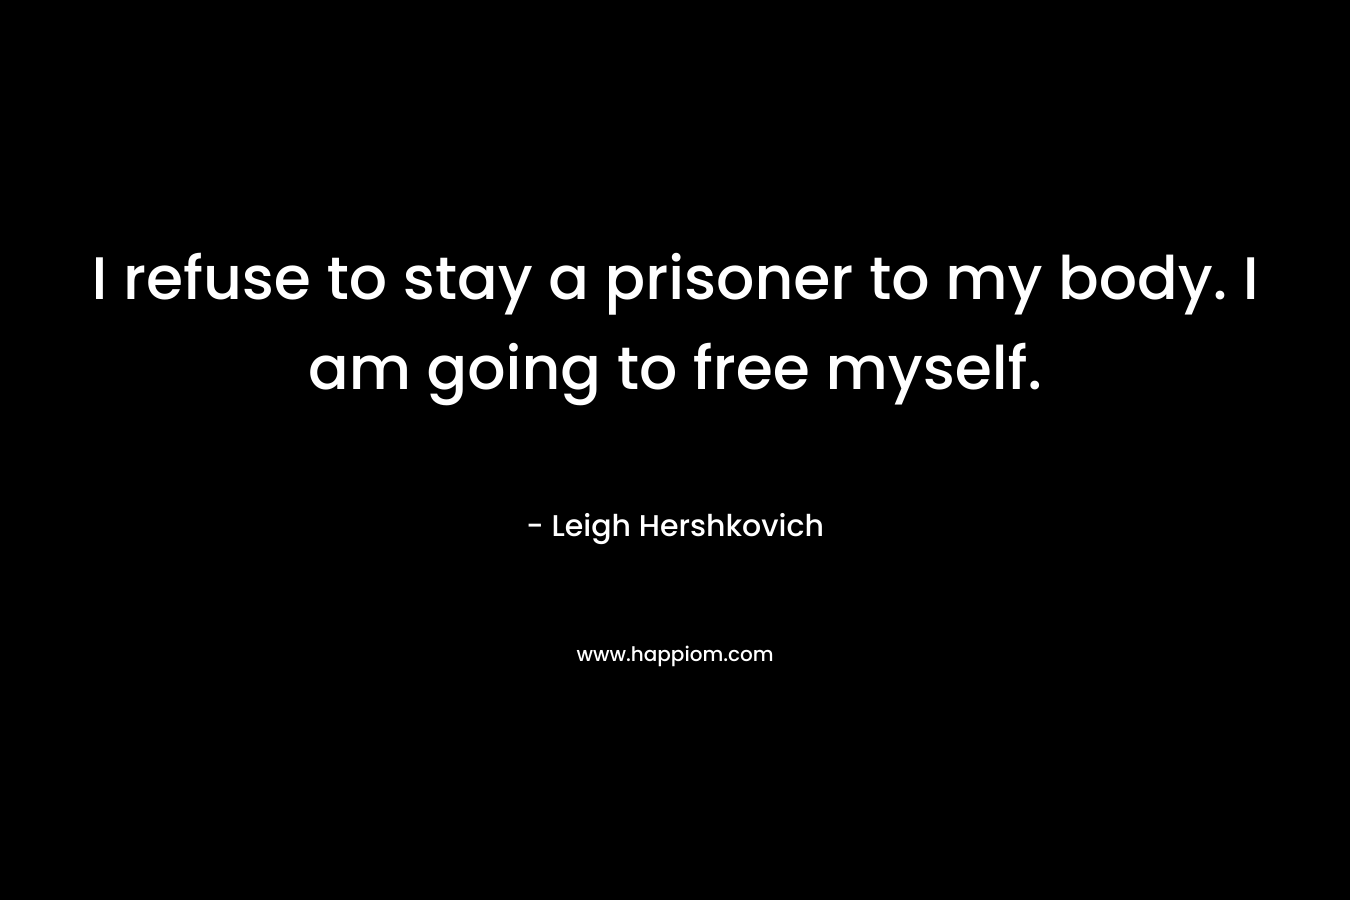 I refuse to stay a prisoner to my body. I am going to free myself. – Leigh Hershkovich